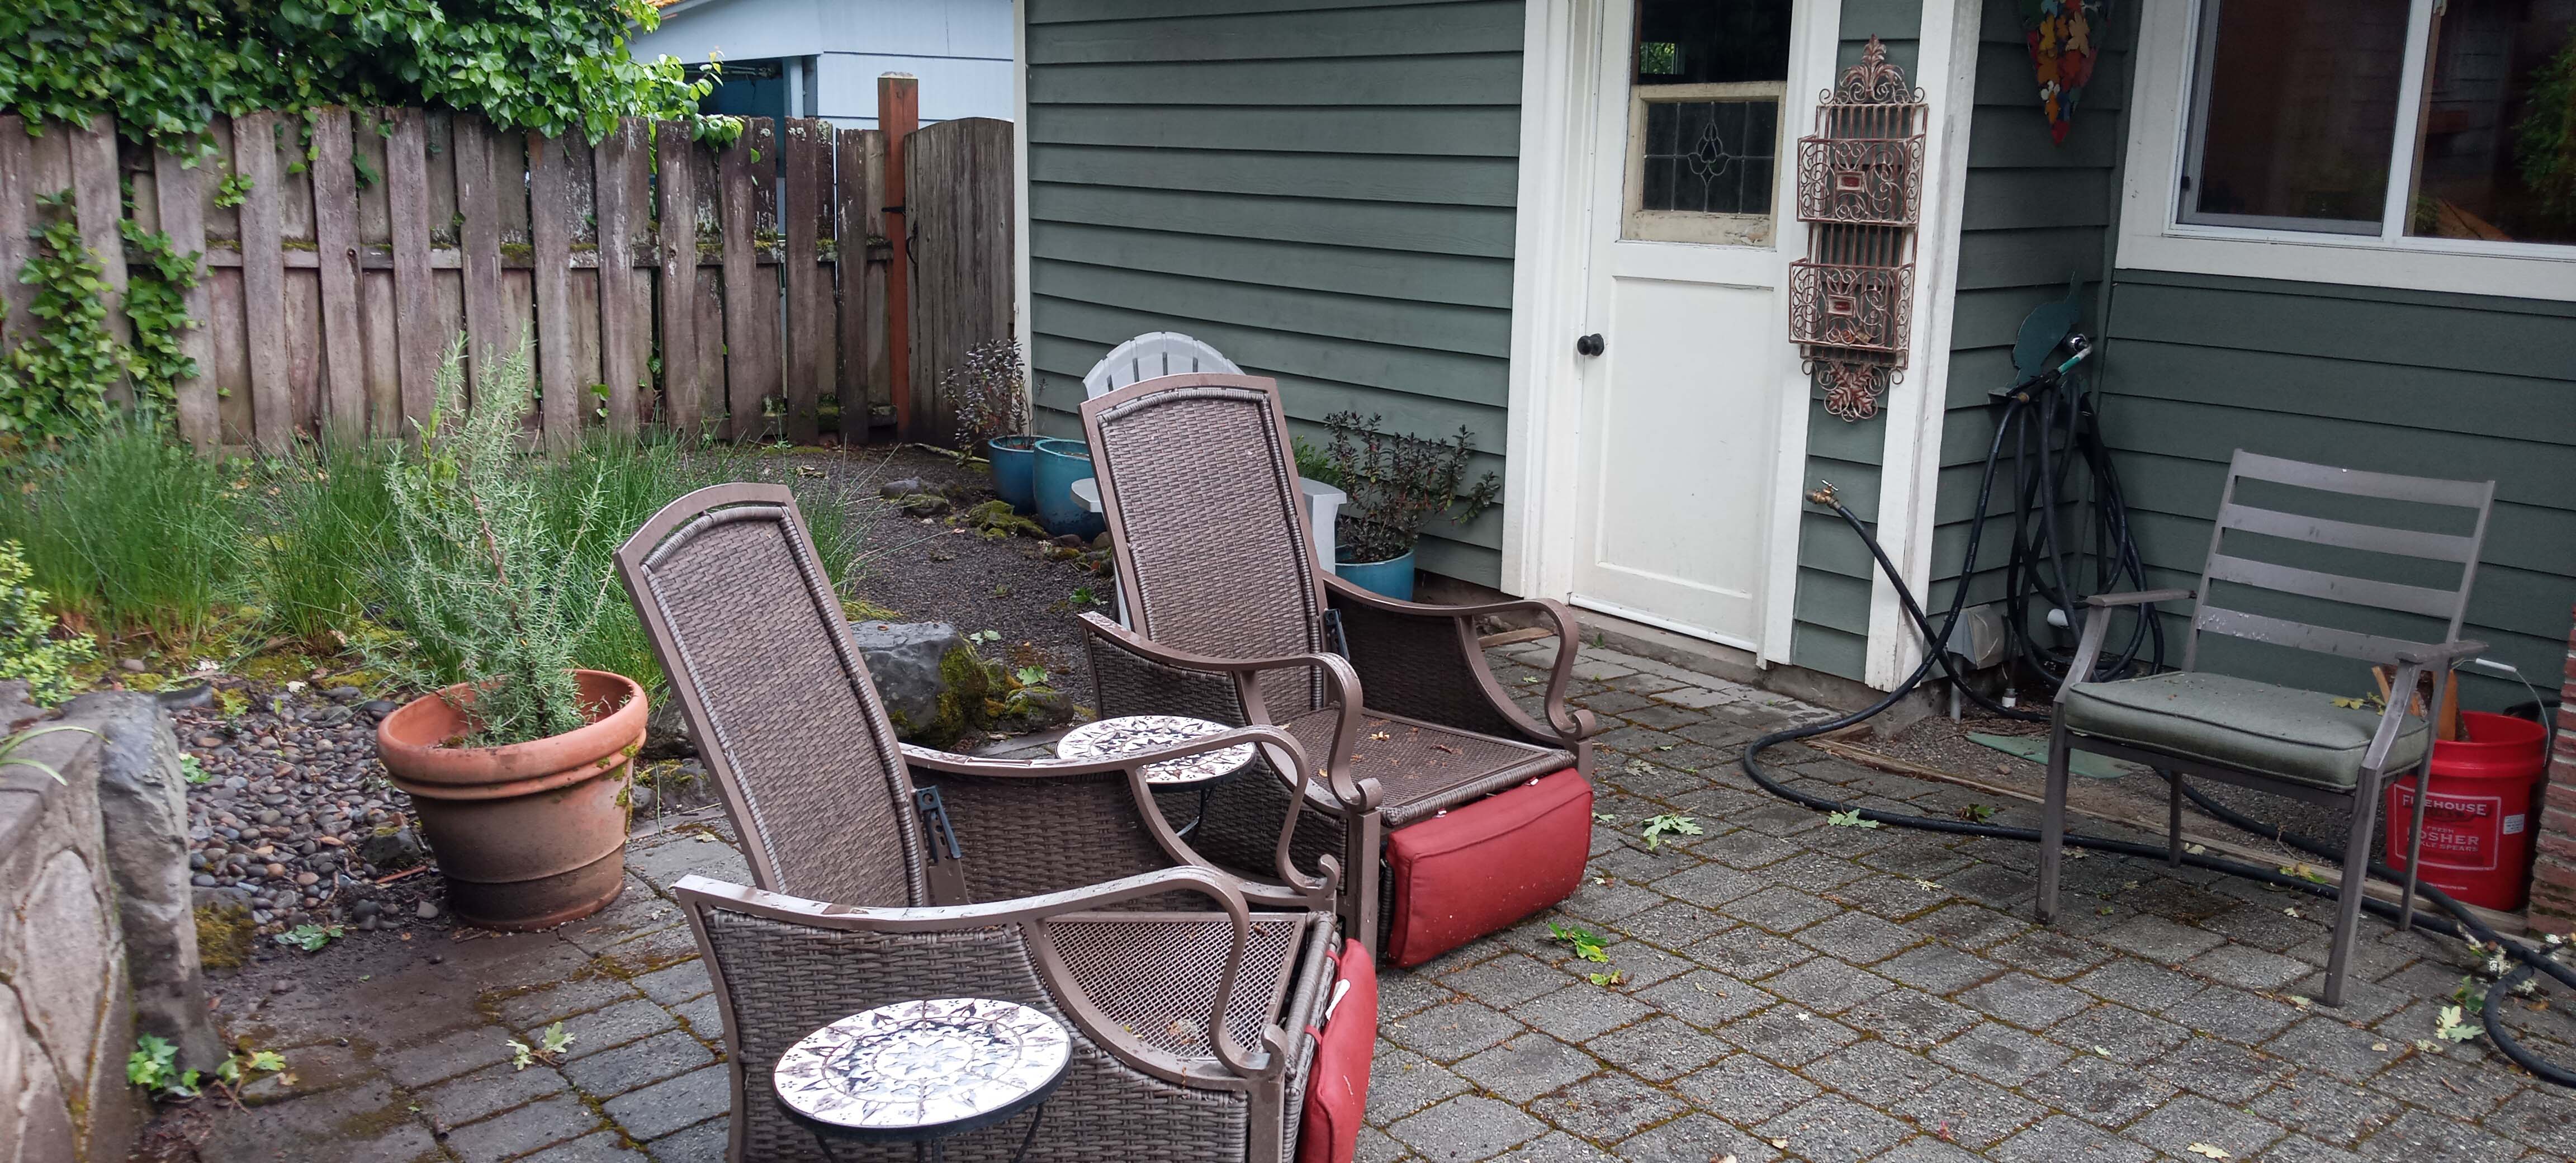 Simple backyard patio in need of remodeling